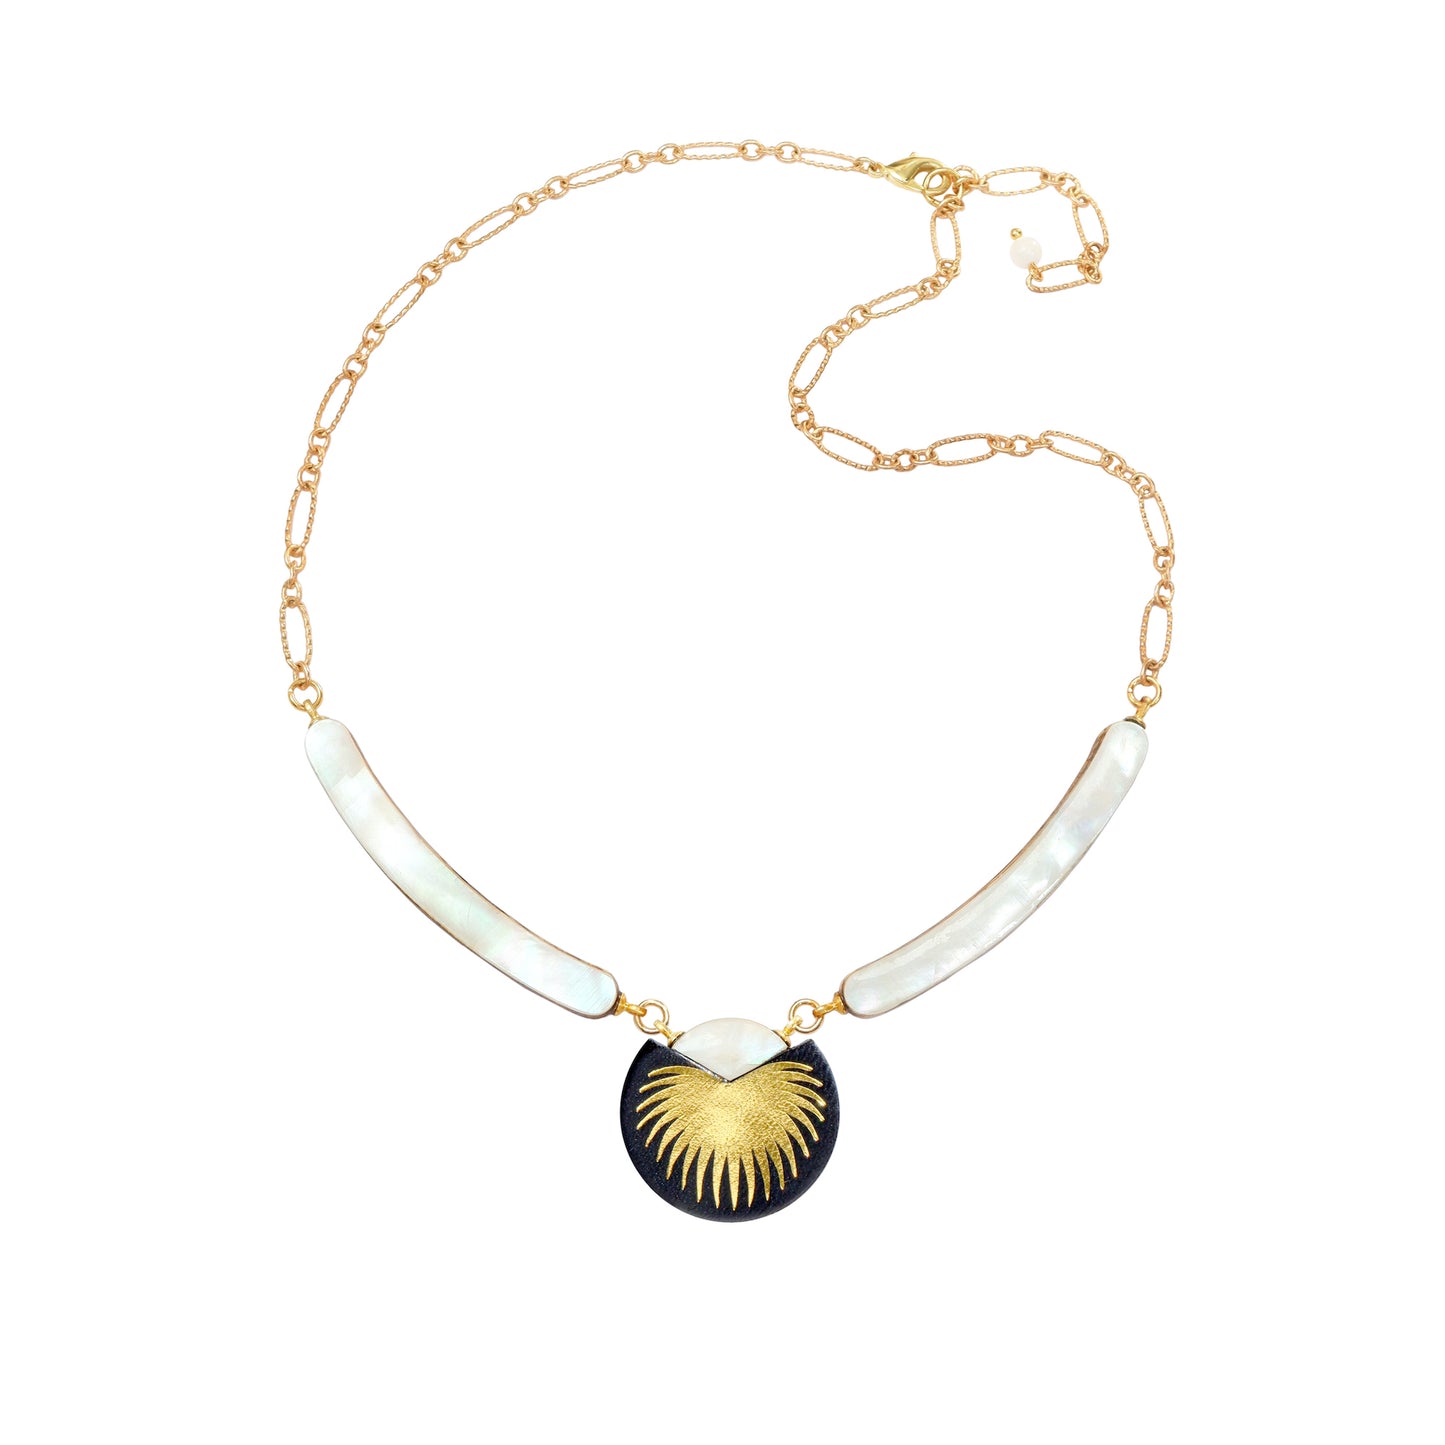 necklace with curved mother of pearl bars , black leather medallion with a gold palm print